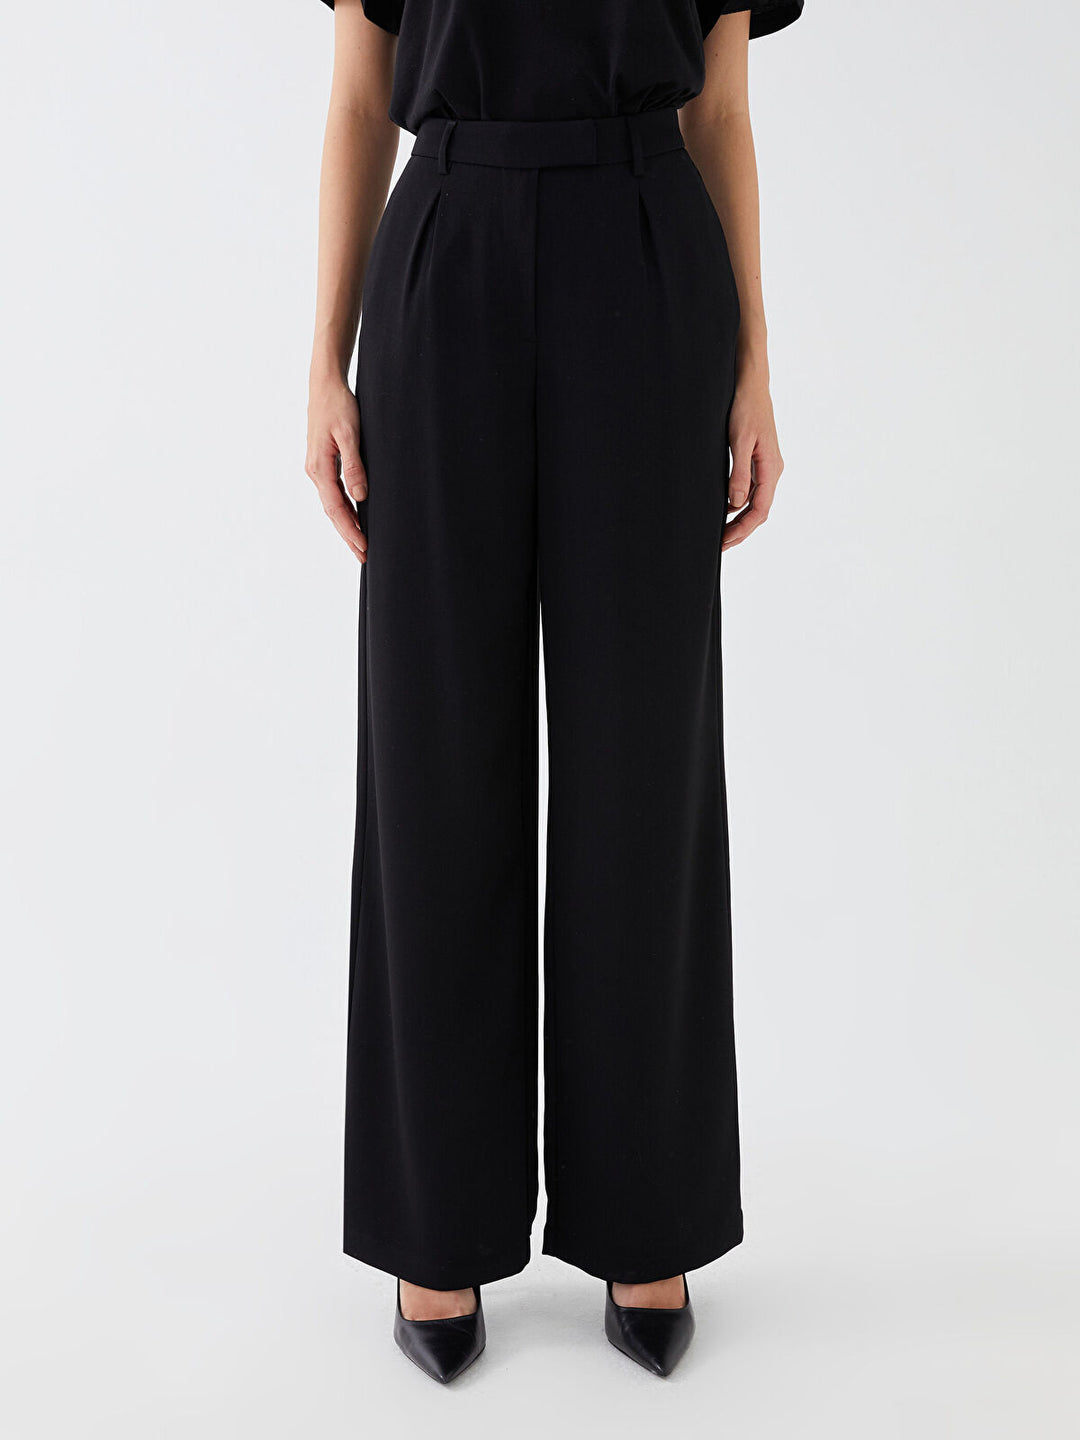 Comfortable Fit Straight Crepe Women Trousers